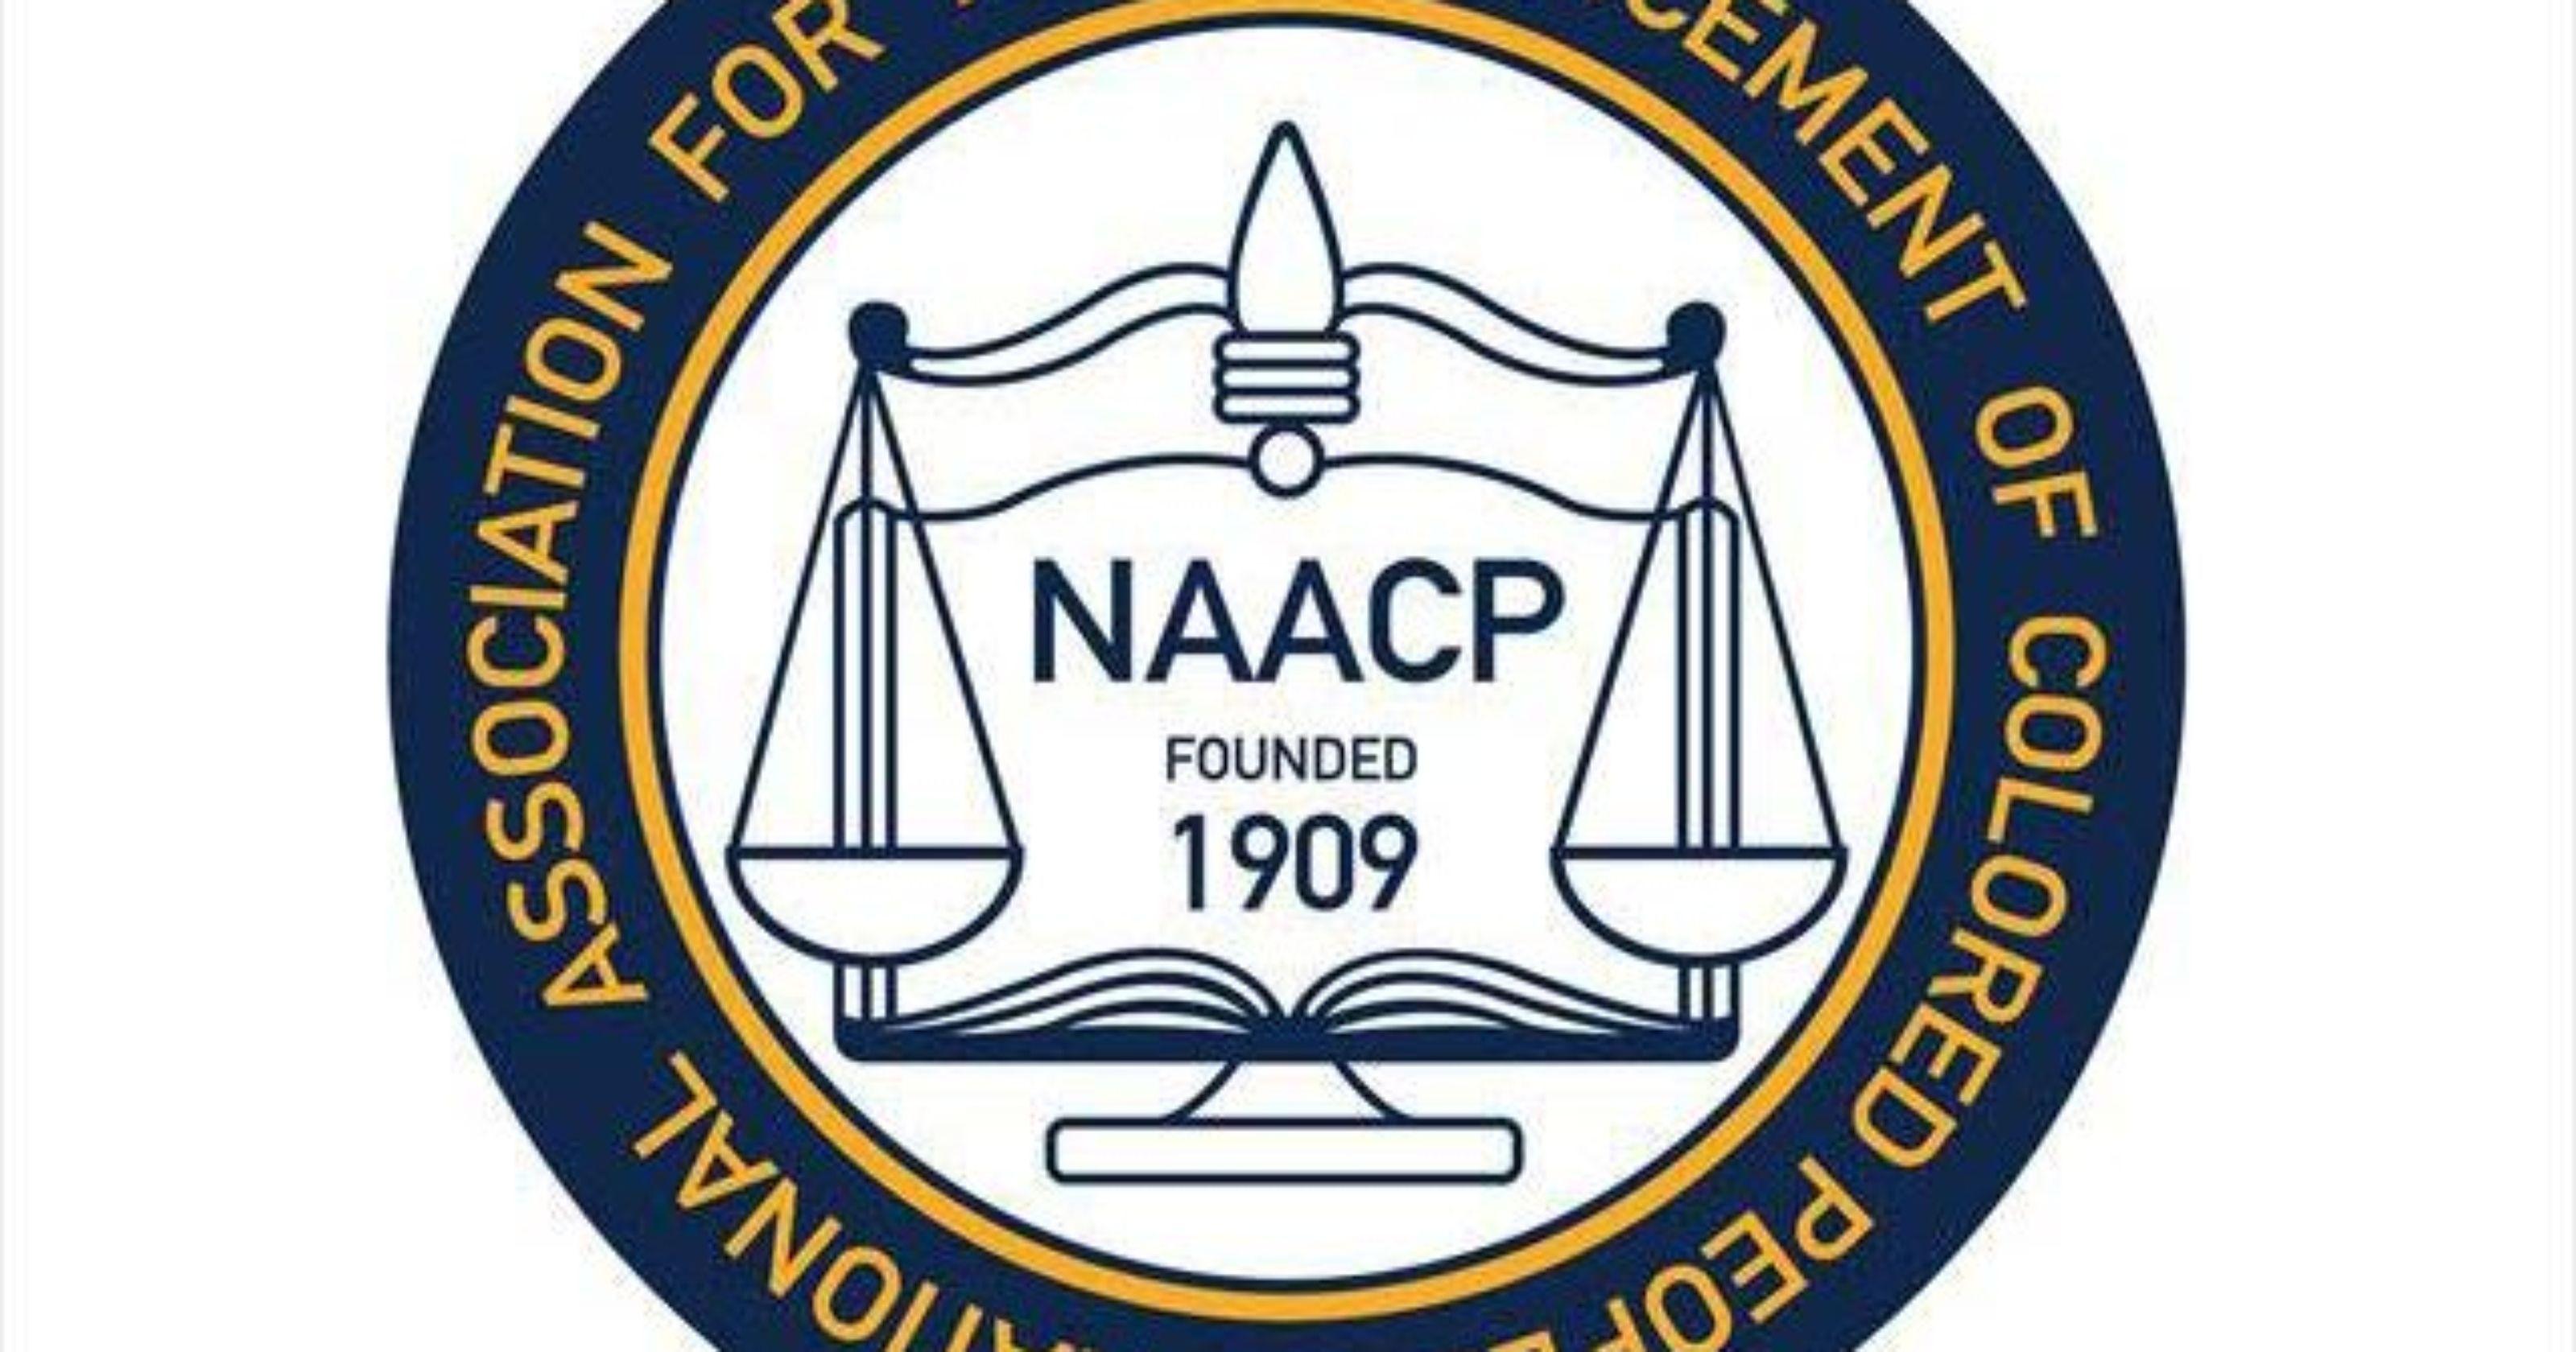 NAACP Logo - NAACP To Honor Detroit Area Students For Anti Gun Violence Activism